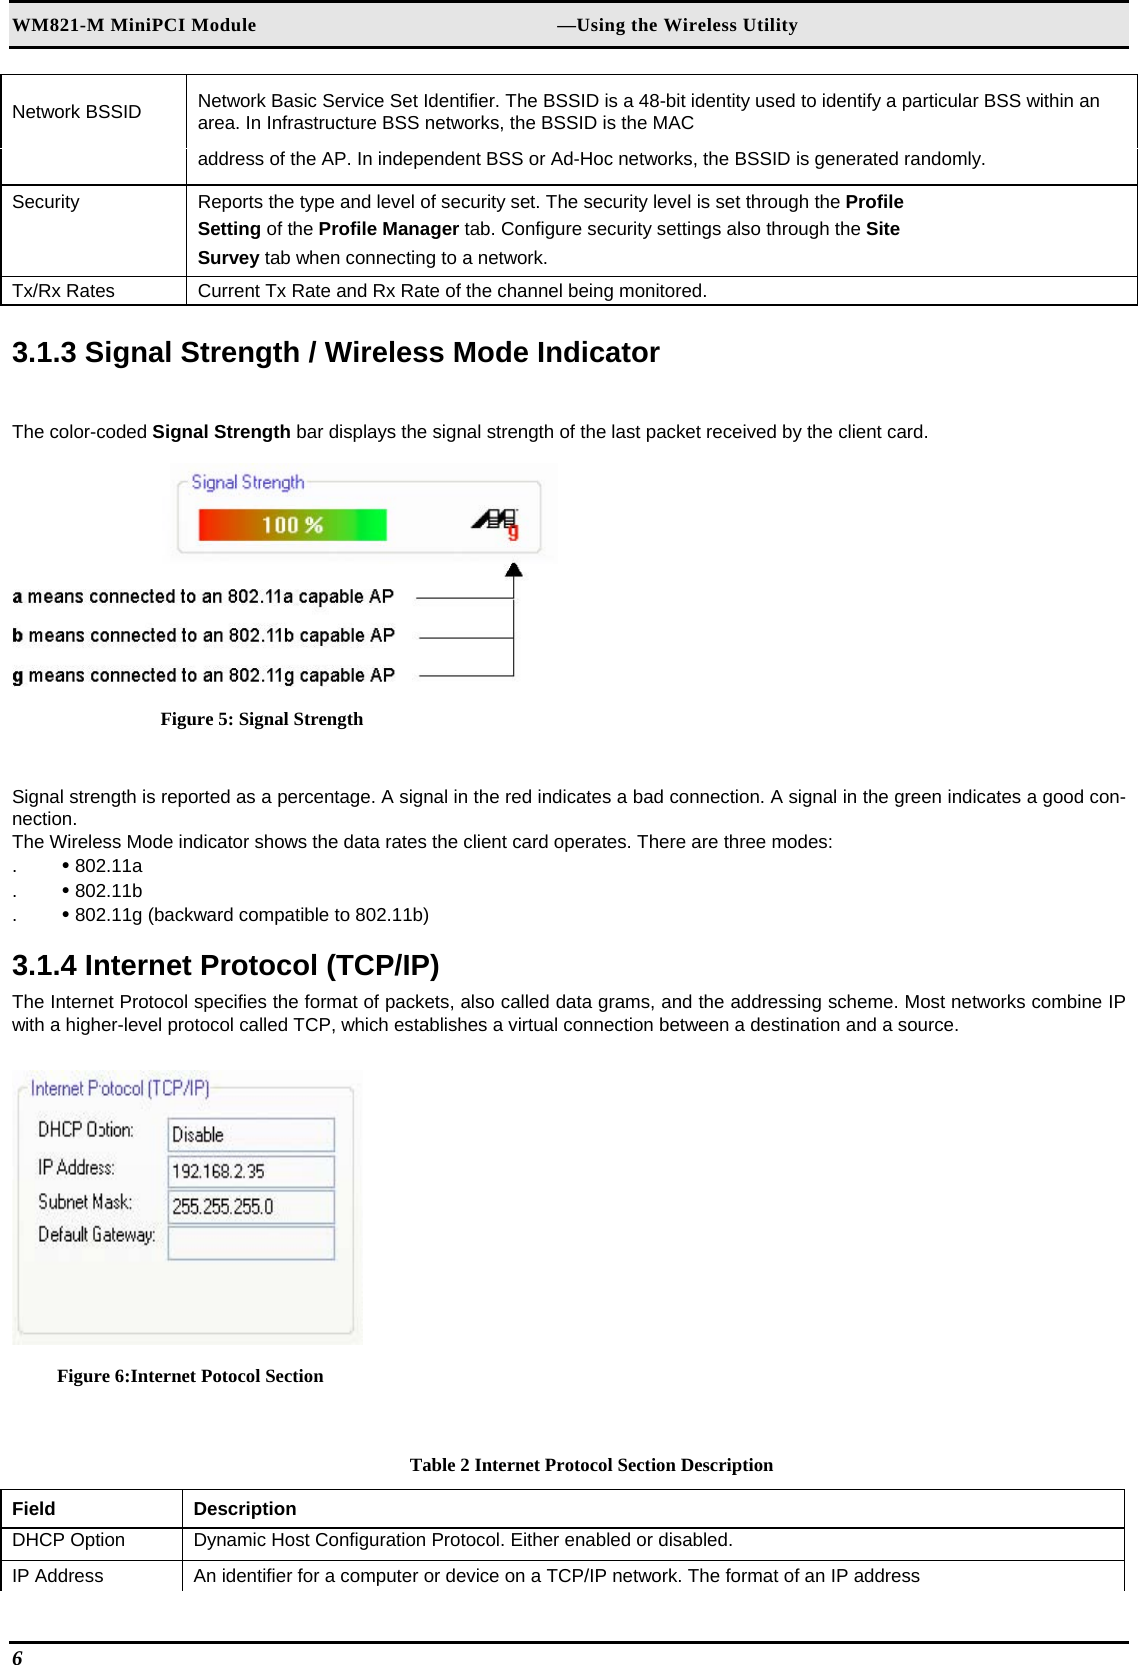 WM821-M MiniPCI Module                                                        —Using the Wireless Utility Network BSSID   Network Basic Service Set Identifier. The BSSID is a 48-bit identity used to identify a particular BSS within an area. In Infrastructure BSS networks, the BSSID is the MAC   address of the AP. In independent BSS or Ad-Hoc networks, the BSSID is generated randomly.  Security   Reports the type and level of security set. The security level is set through the Profile   Setting of the Profile Manager tab. Configure security settings also through the Site   Survey tab when connecting to a network.  Tx/Rx Rates   Current Tx Rate and Rx Rate of the channel being monitored.   3.1.3 Signal Strength / Wireless Mode Indicator  The color-coded Signal Strength bar displays the signal strength of the last packet received by the client card.   Figure 5: Signal Strength  Signal strength is reported as a percentage. A signal in the red indicates a bad connection. A signal in the green indicates a good con-nection.  The Wireless Mode indicator shows the data rates the client card operates. There are three modes:  .  • 802.11a  .  • 802.11b  .  • 802.11g (backward compatible to 802.11b)   3.1.4 Internet Protocol (TCP/IP)  The Internet Protocol specifies the format of packets, also called data grams, and the addressing scheme. Most networks combine IP with a higher-level protocol called TCP, which establishes a virtual connection between a destination and a source.   Figure 6:Internet Potocol Section  Table 2 Internet Protocol Section Description Field  Description  DHCP Option   Dynamic Host Configuration Protocol. Either enabled or disabled.  IP Address   An identifier for a computer or device on a TCP/IP network. The format of an IP address  6   